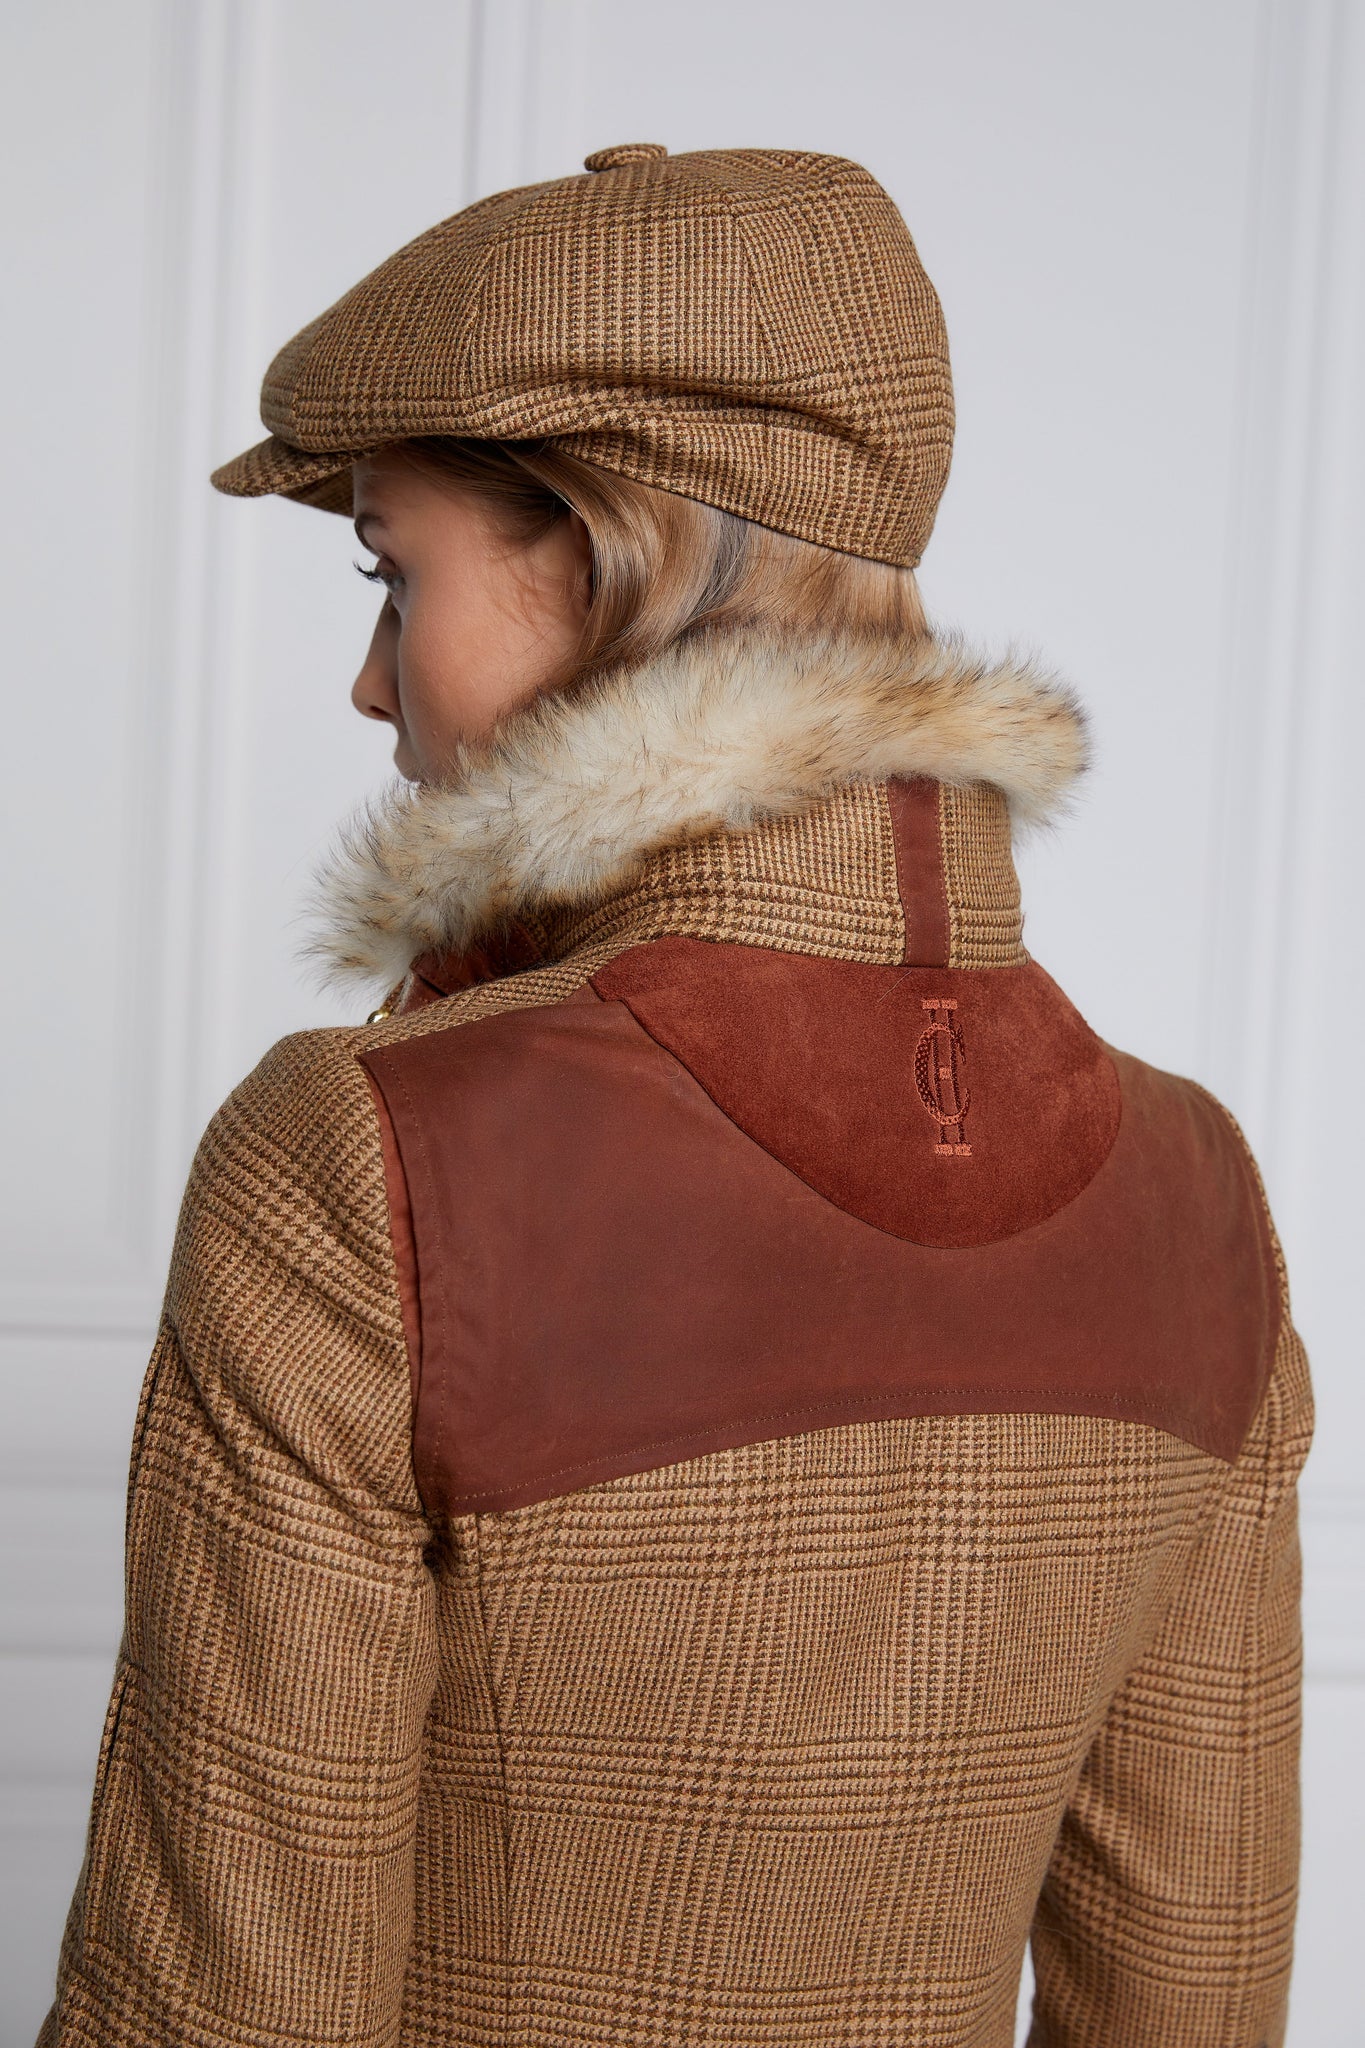 womens fitted field jacket in tawny and brown check tweed trimmed with contrast tan wax fabric on shoulder across back and on the hip with faux fur trim around the neck finished with horn button fastenings an buckles on the collar cuffs and hip